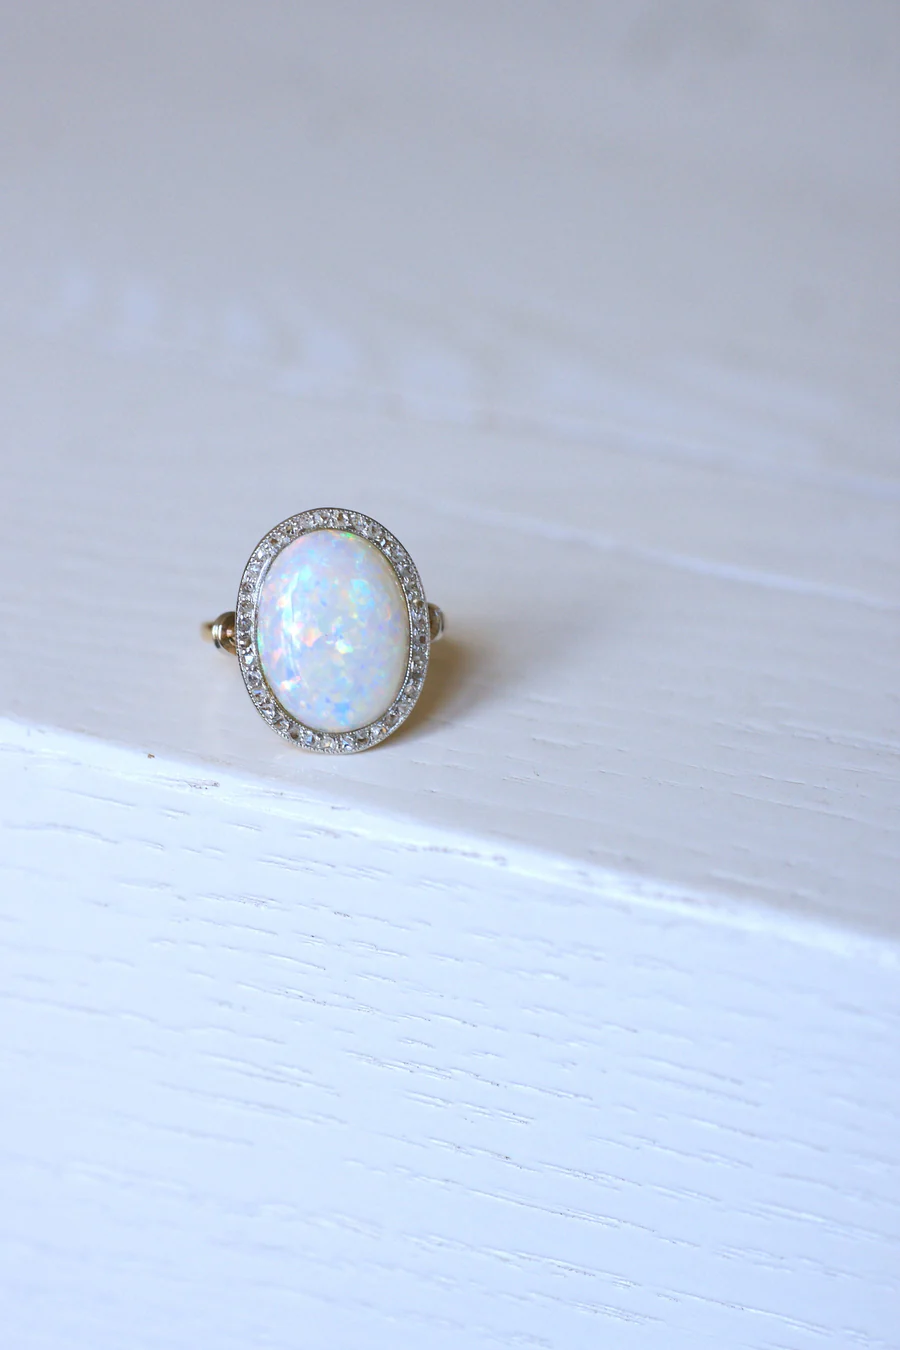 Belle Epoque Pompadour opal ring set in diamonds on gold and platinum, Circa 1900